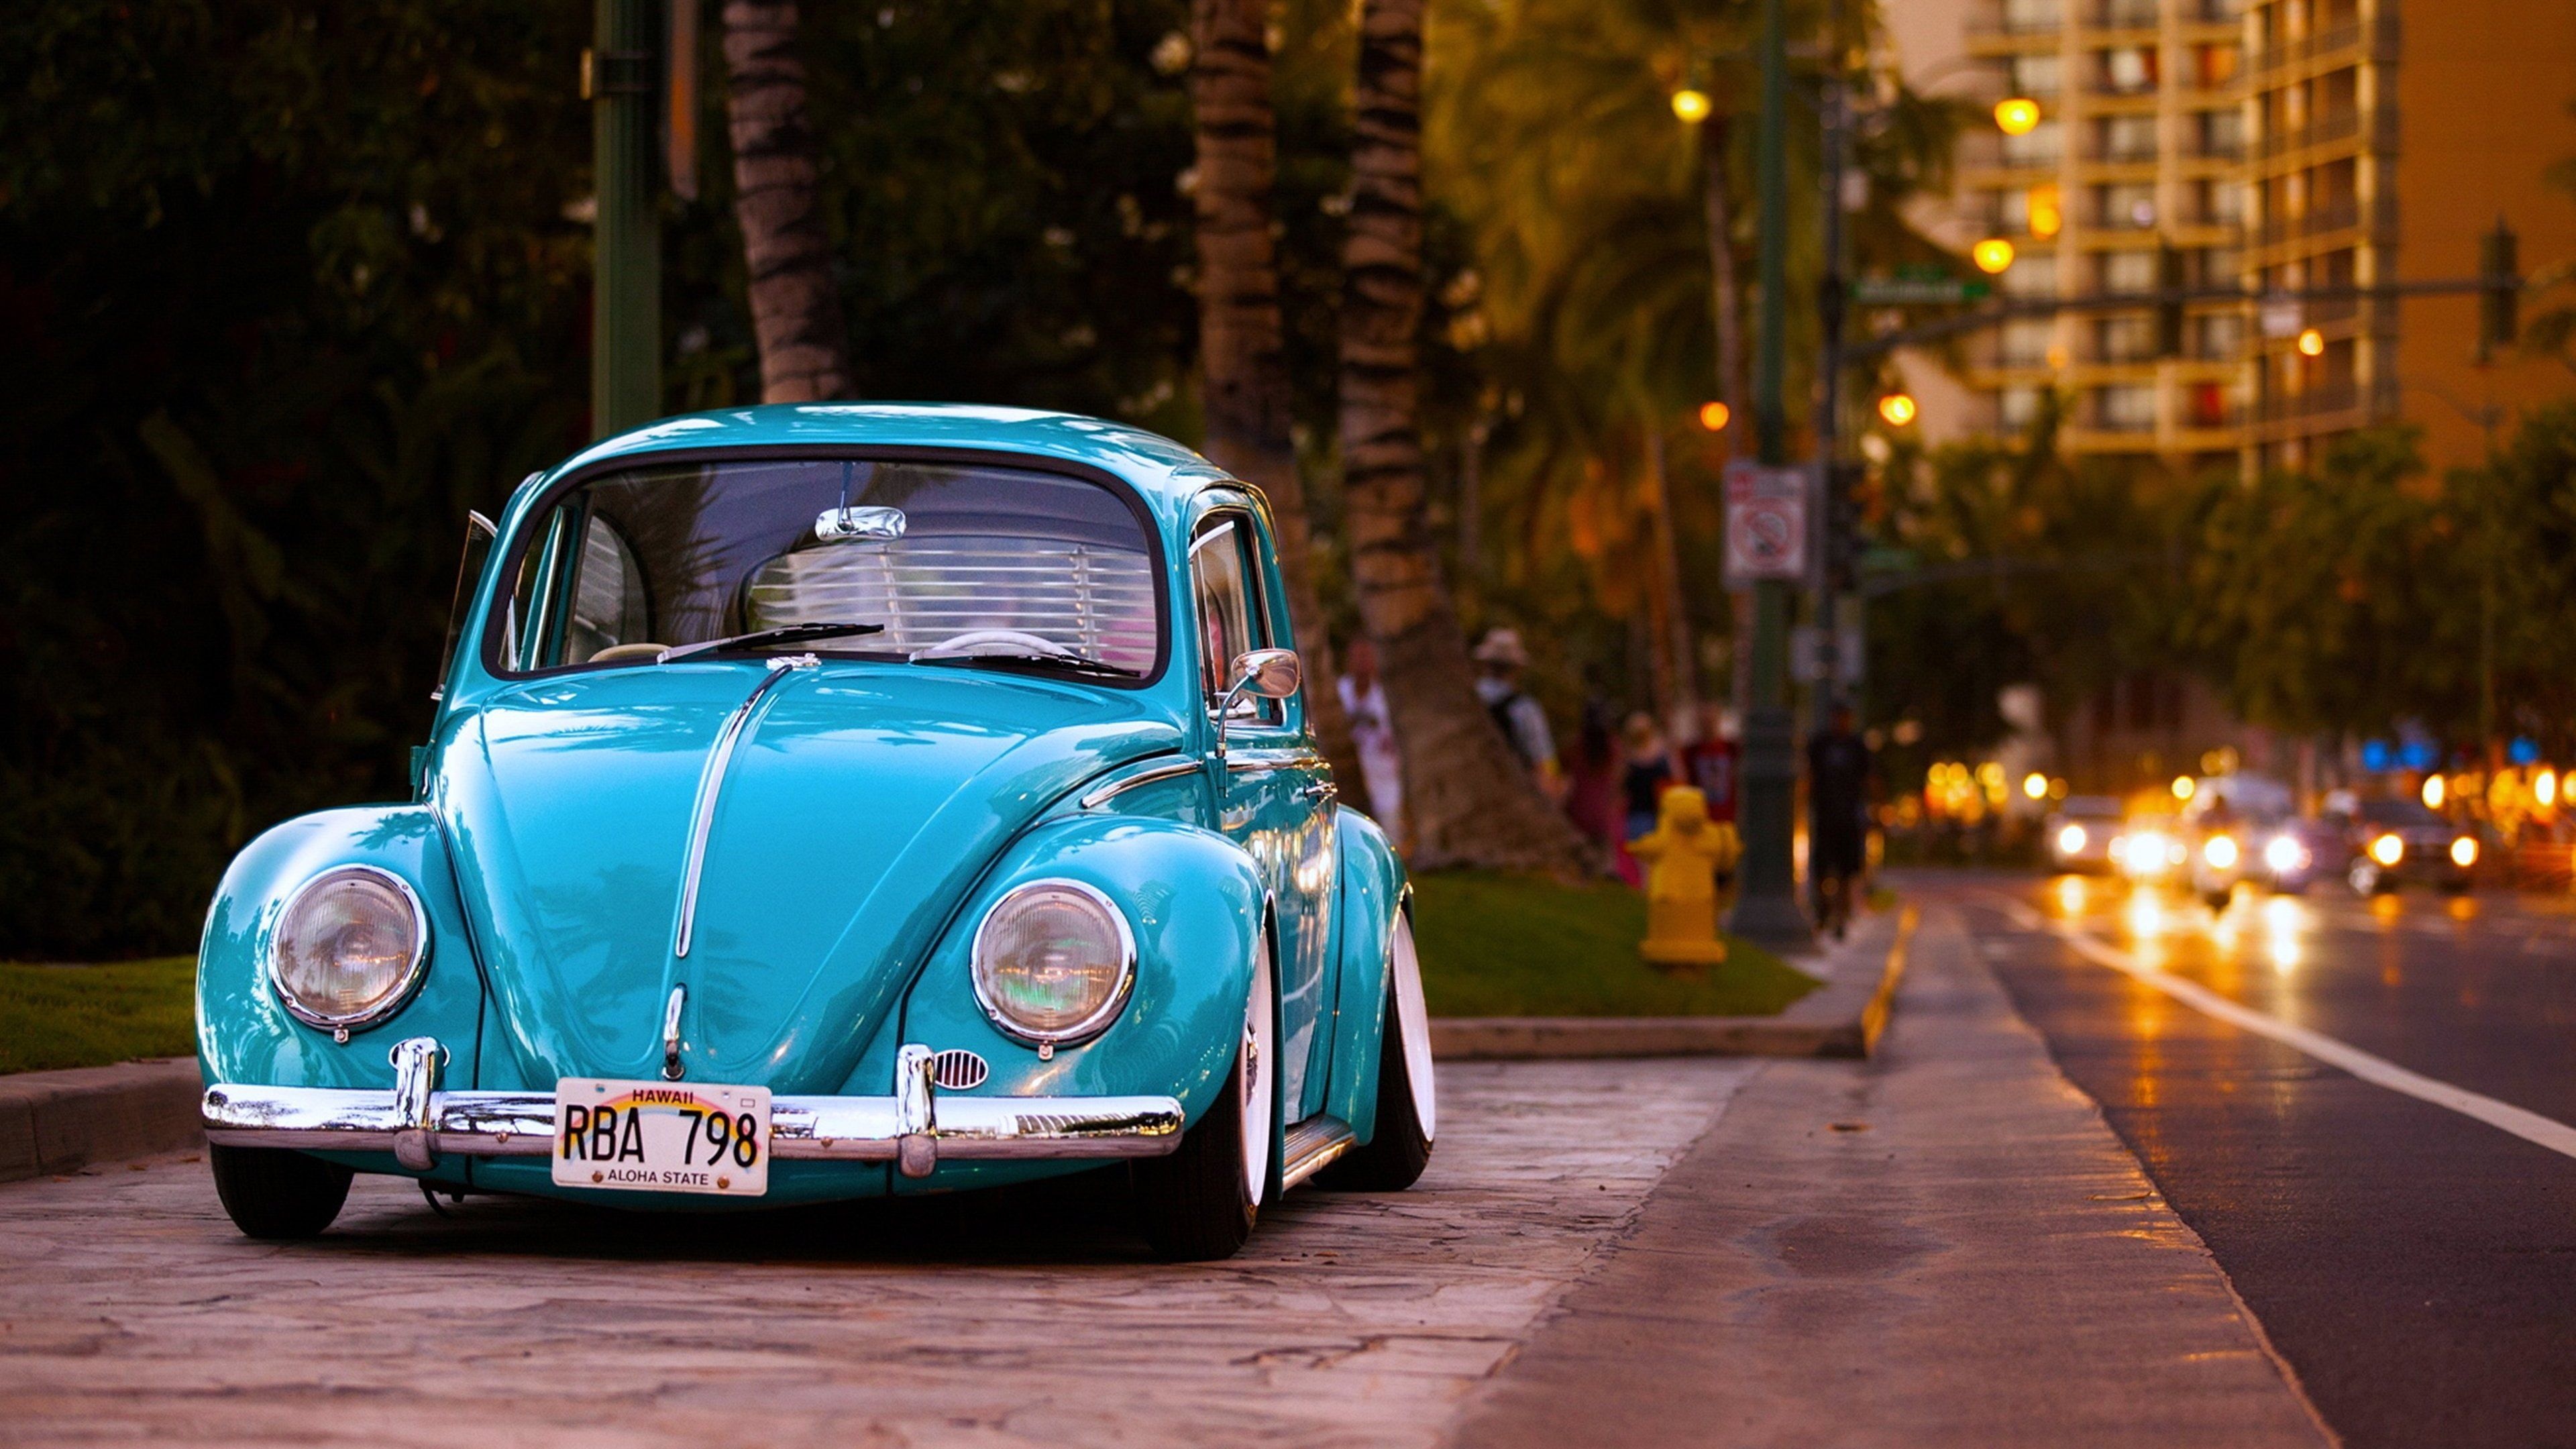 Vintage Car: Volkswagen Beetle, The rear-wheel drive, The standard layout during the era. 3840x2160 4K Background.